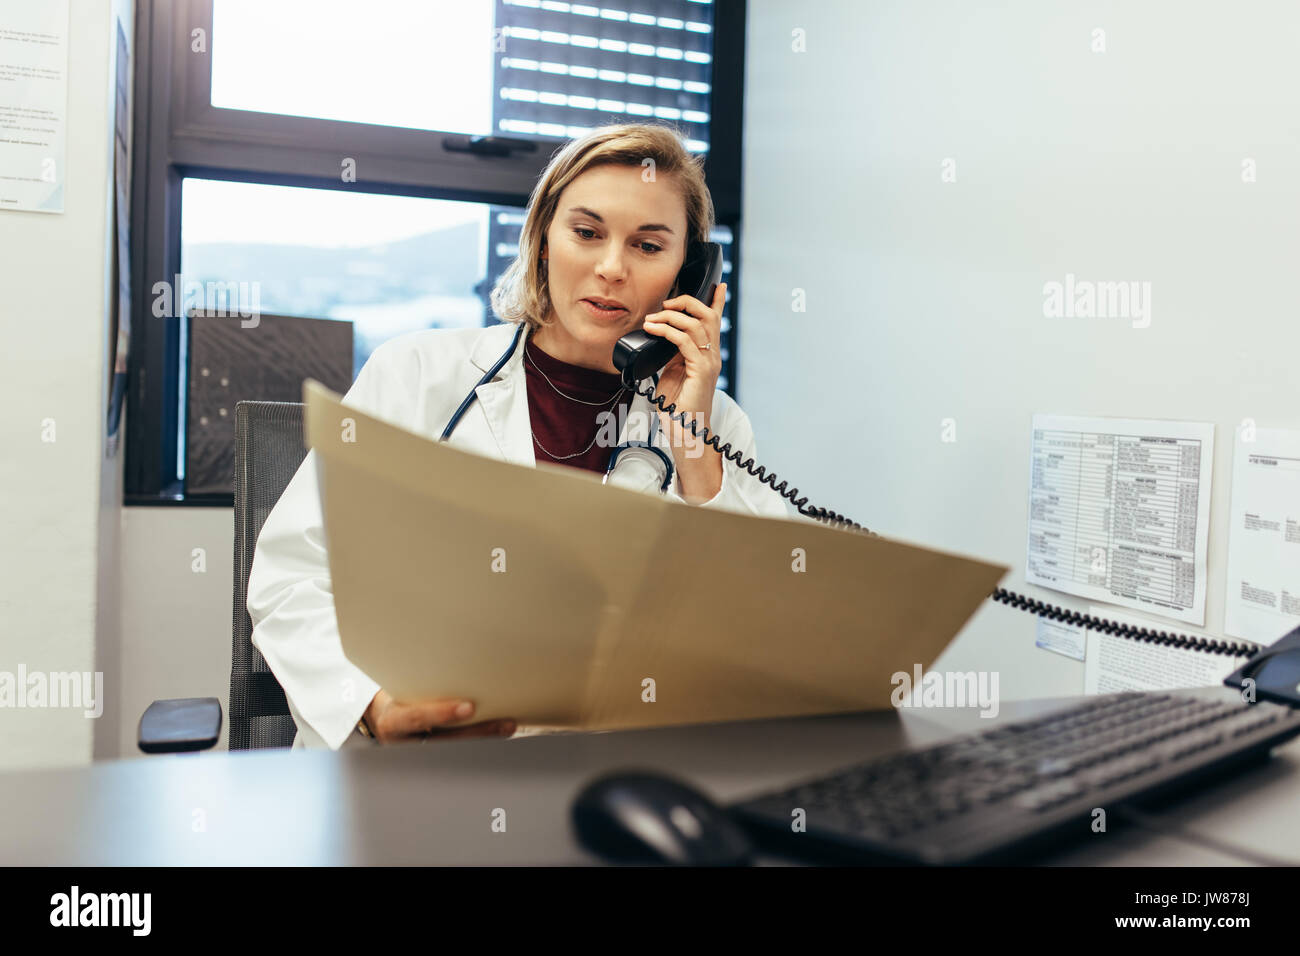 Doctor reading medical records and talking on telephone.  Medicine practitioner examining medical reports and using telephone in her clinic. Stock Photo